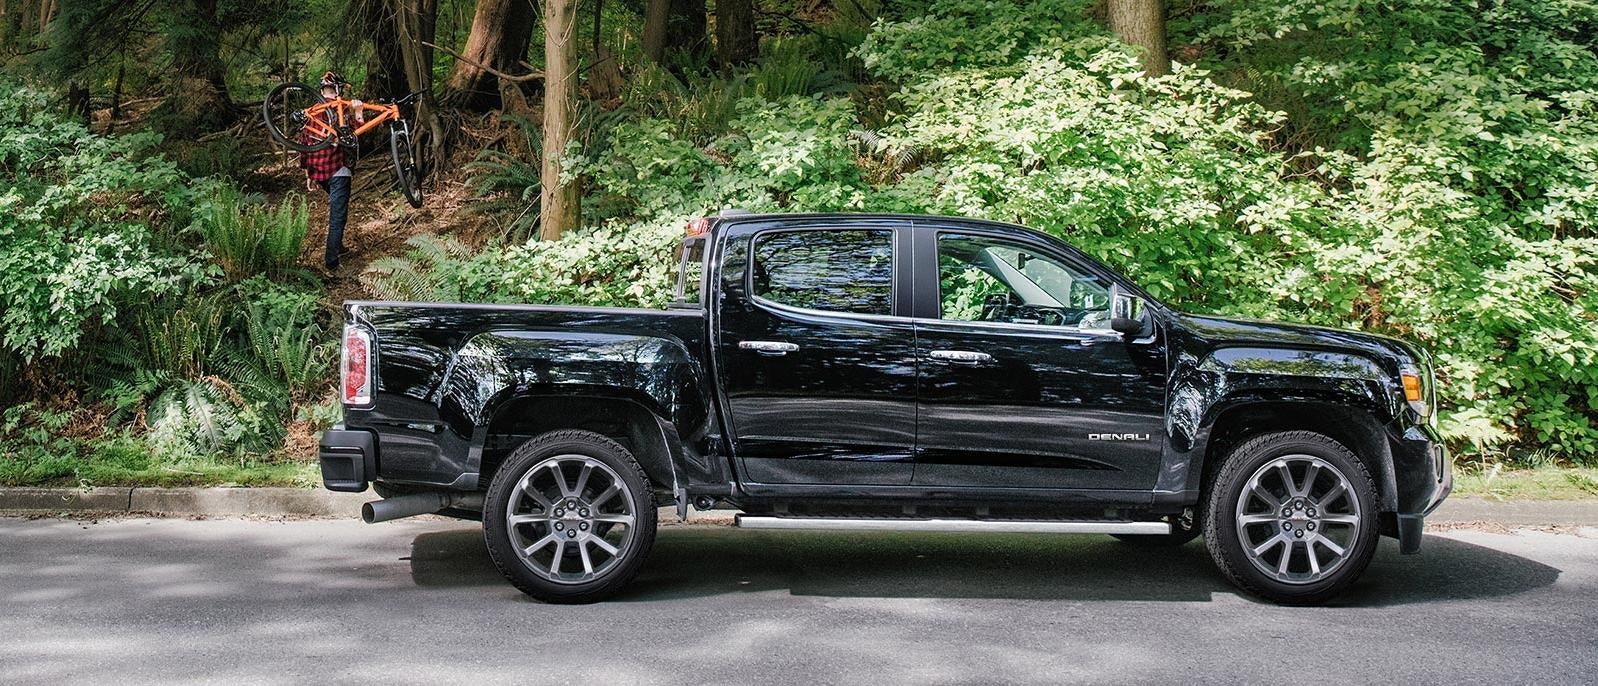 2019 GMC Canyon Fishers IN